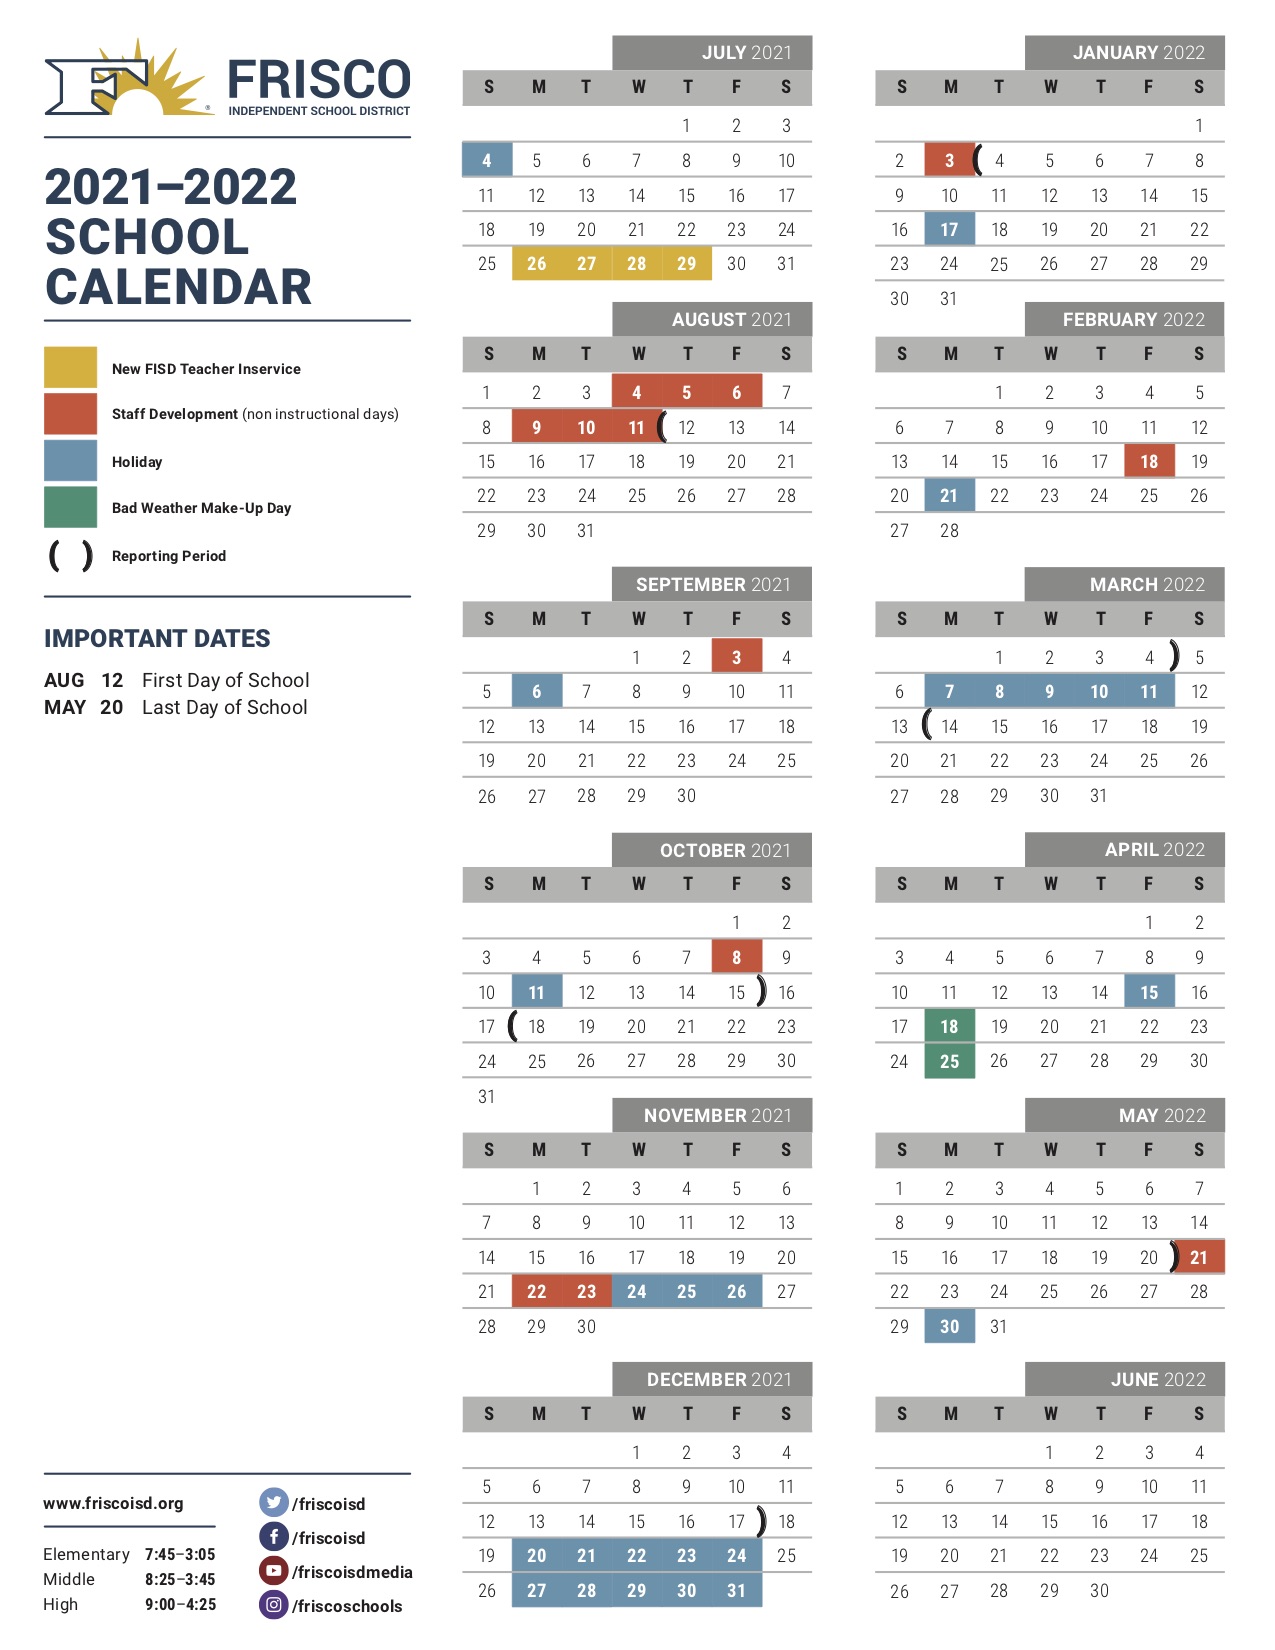 Frisco Isd On Twitter The Frisco Isd Academic Calendar Has Been Approved For The 2021 22 School Year Check Out Https T Co Y7mwd9ngeg For An Overview Of The Approved Calendar Https T Co Jbqnncygj0